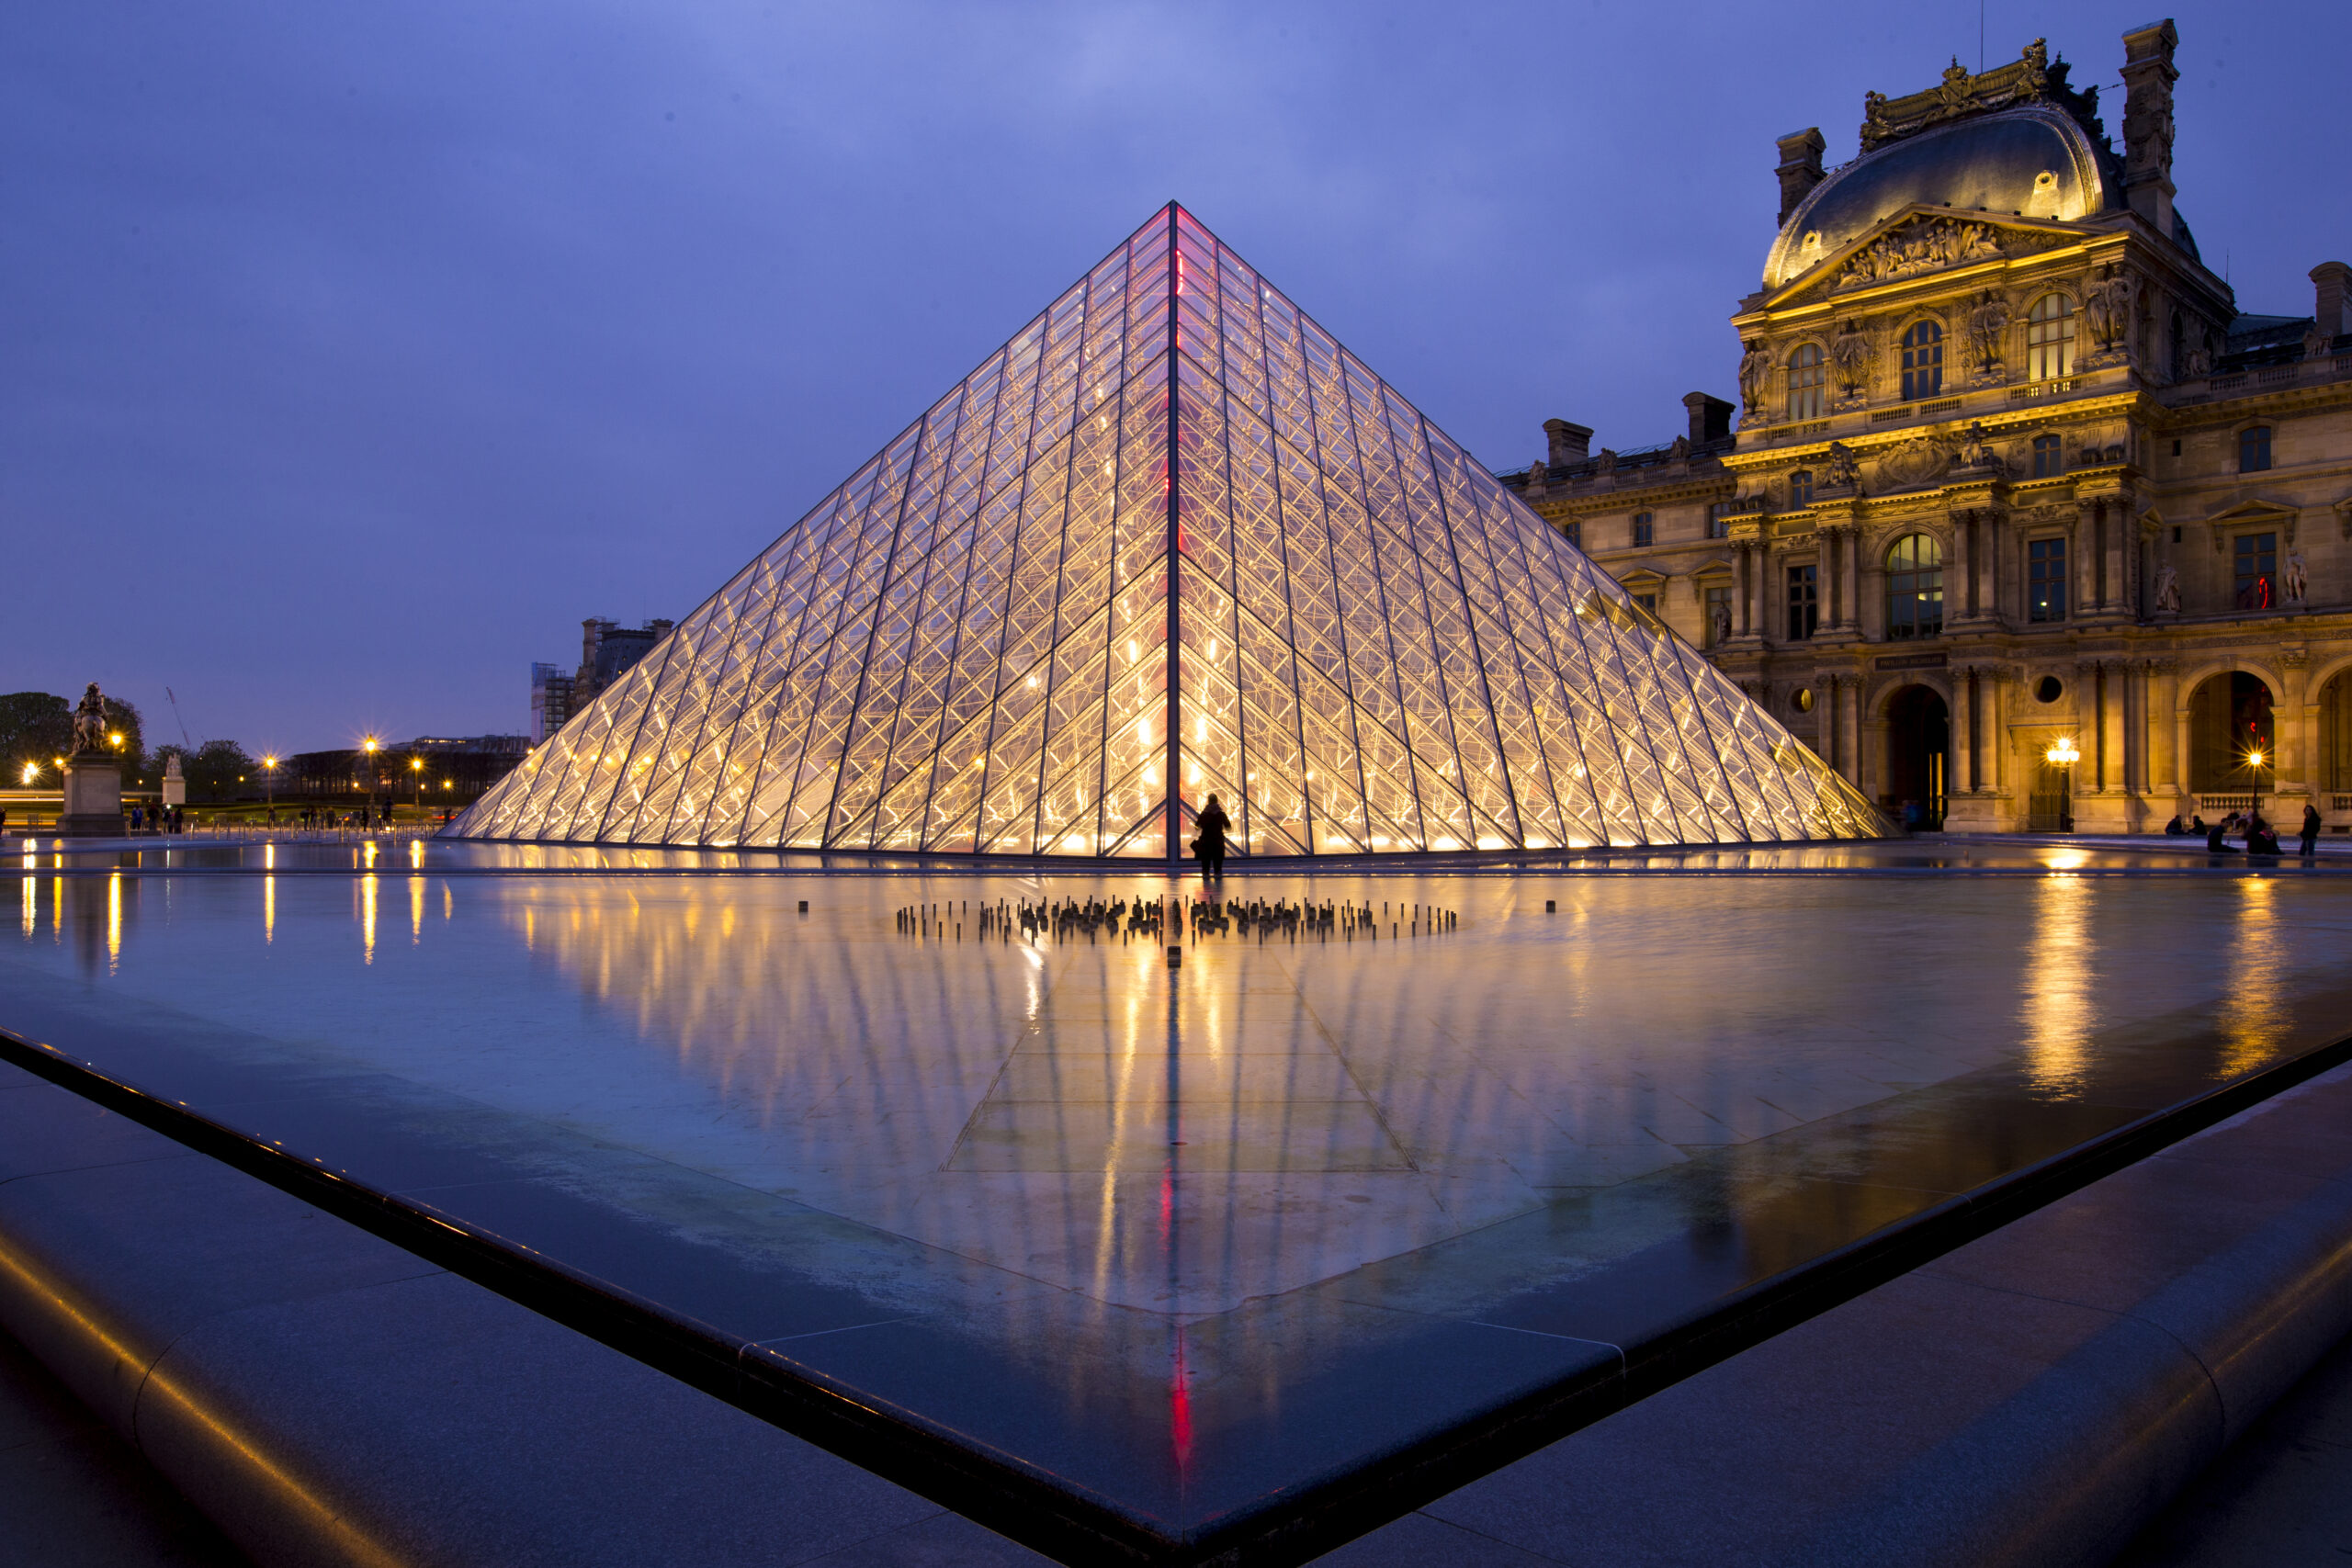 The Louvre’s glass pyramid lit up at night in Paris.